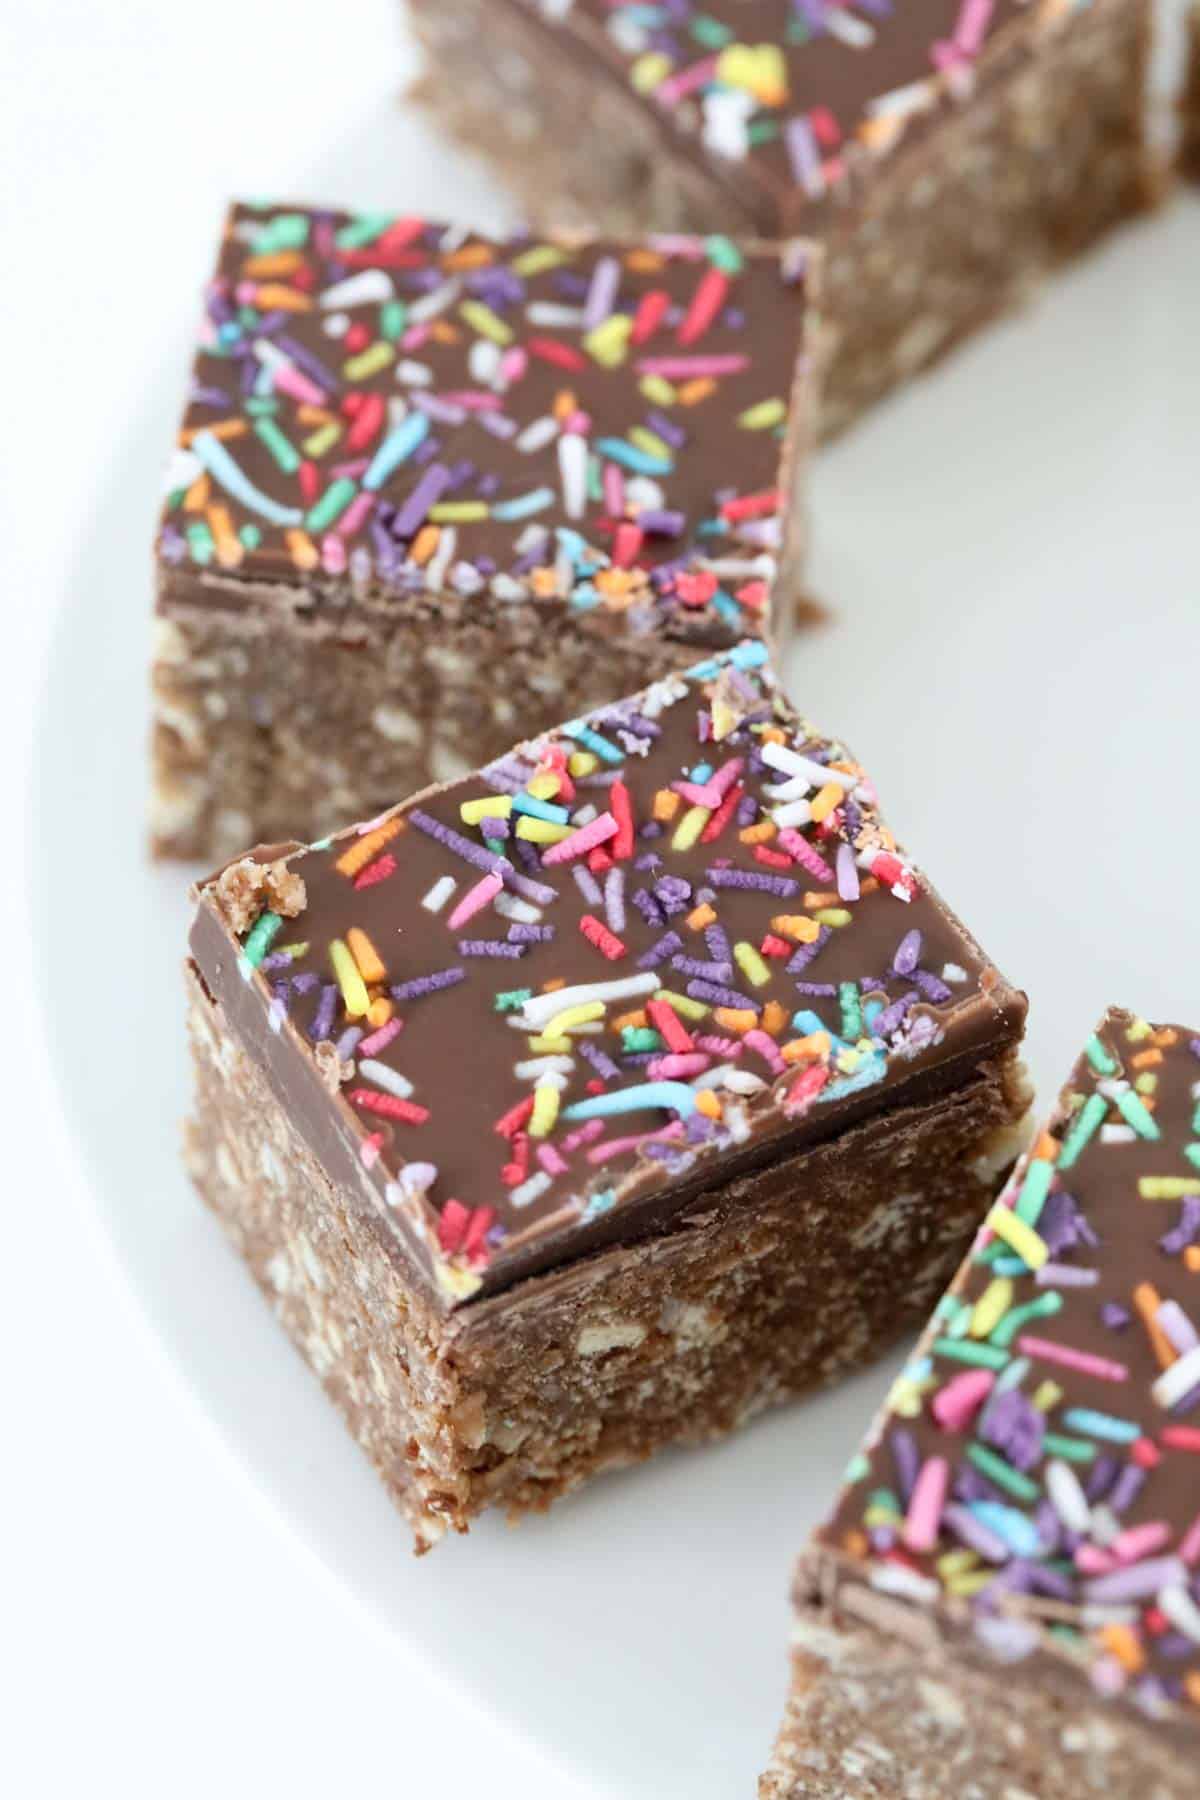 Sprinkles chocolate slice cut into pieces.